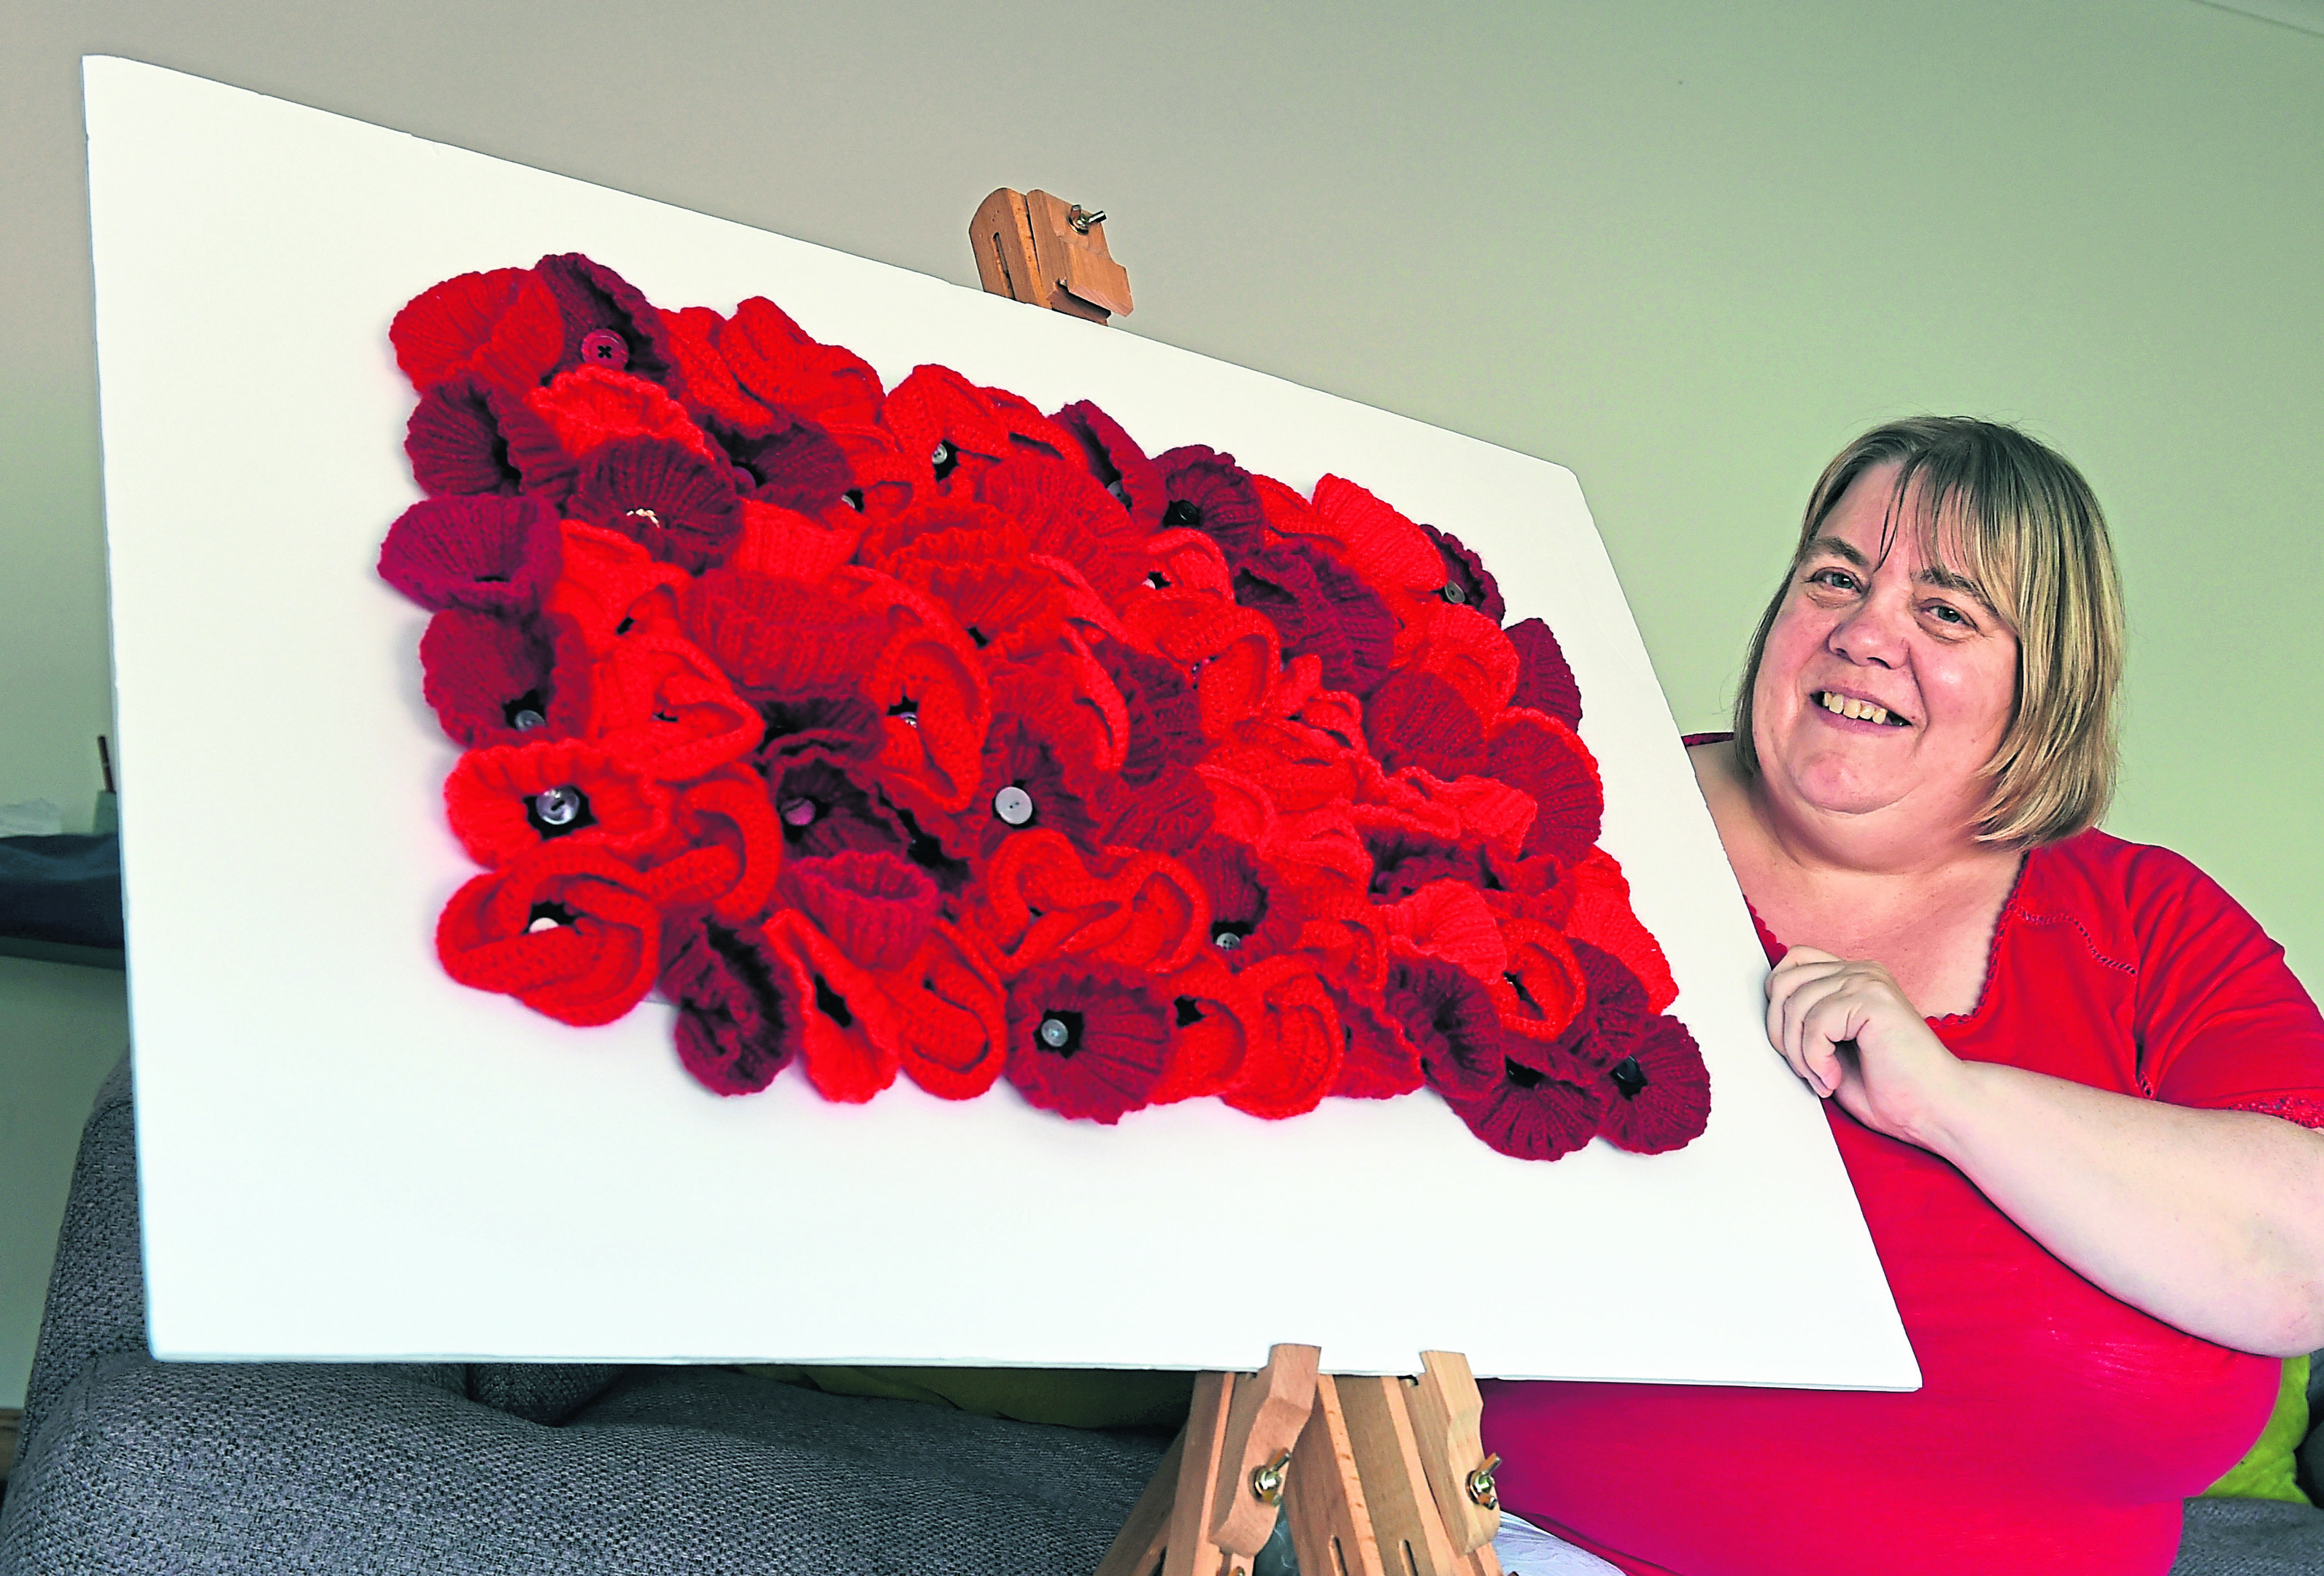 Nancy Duncan, Peterhead, celebrating 100 years of the WW1 anniversary by creating and collecting 10,000 knitted poppies